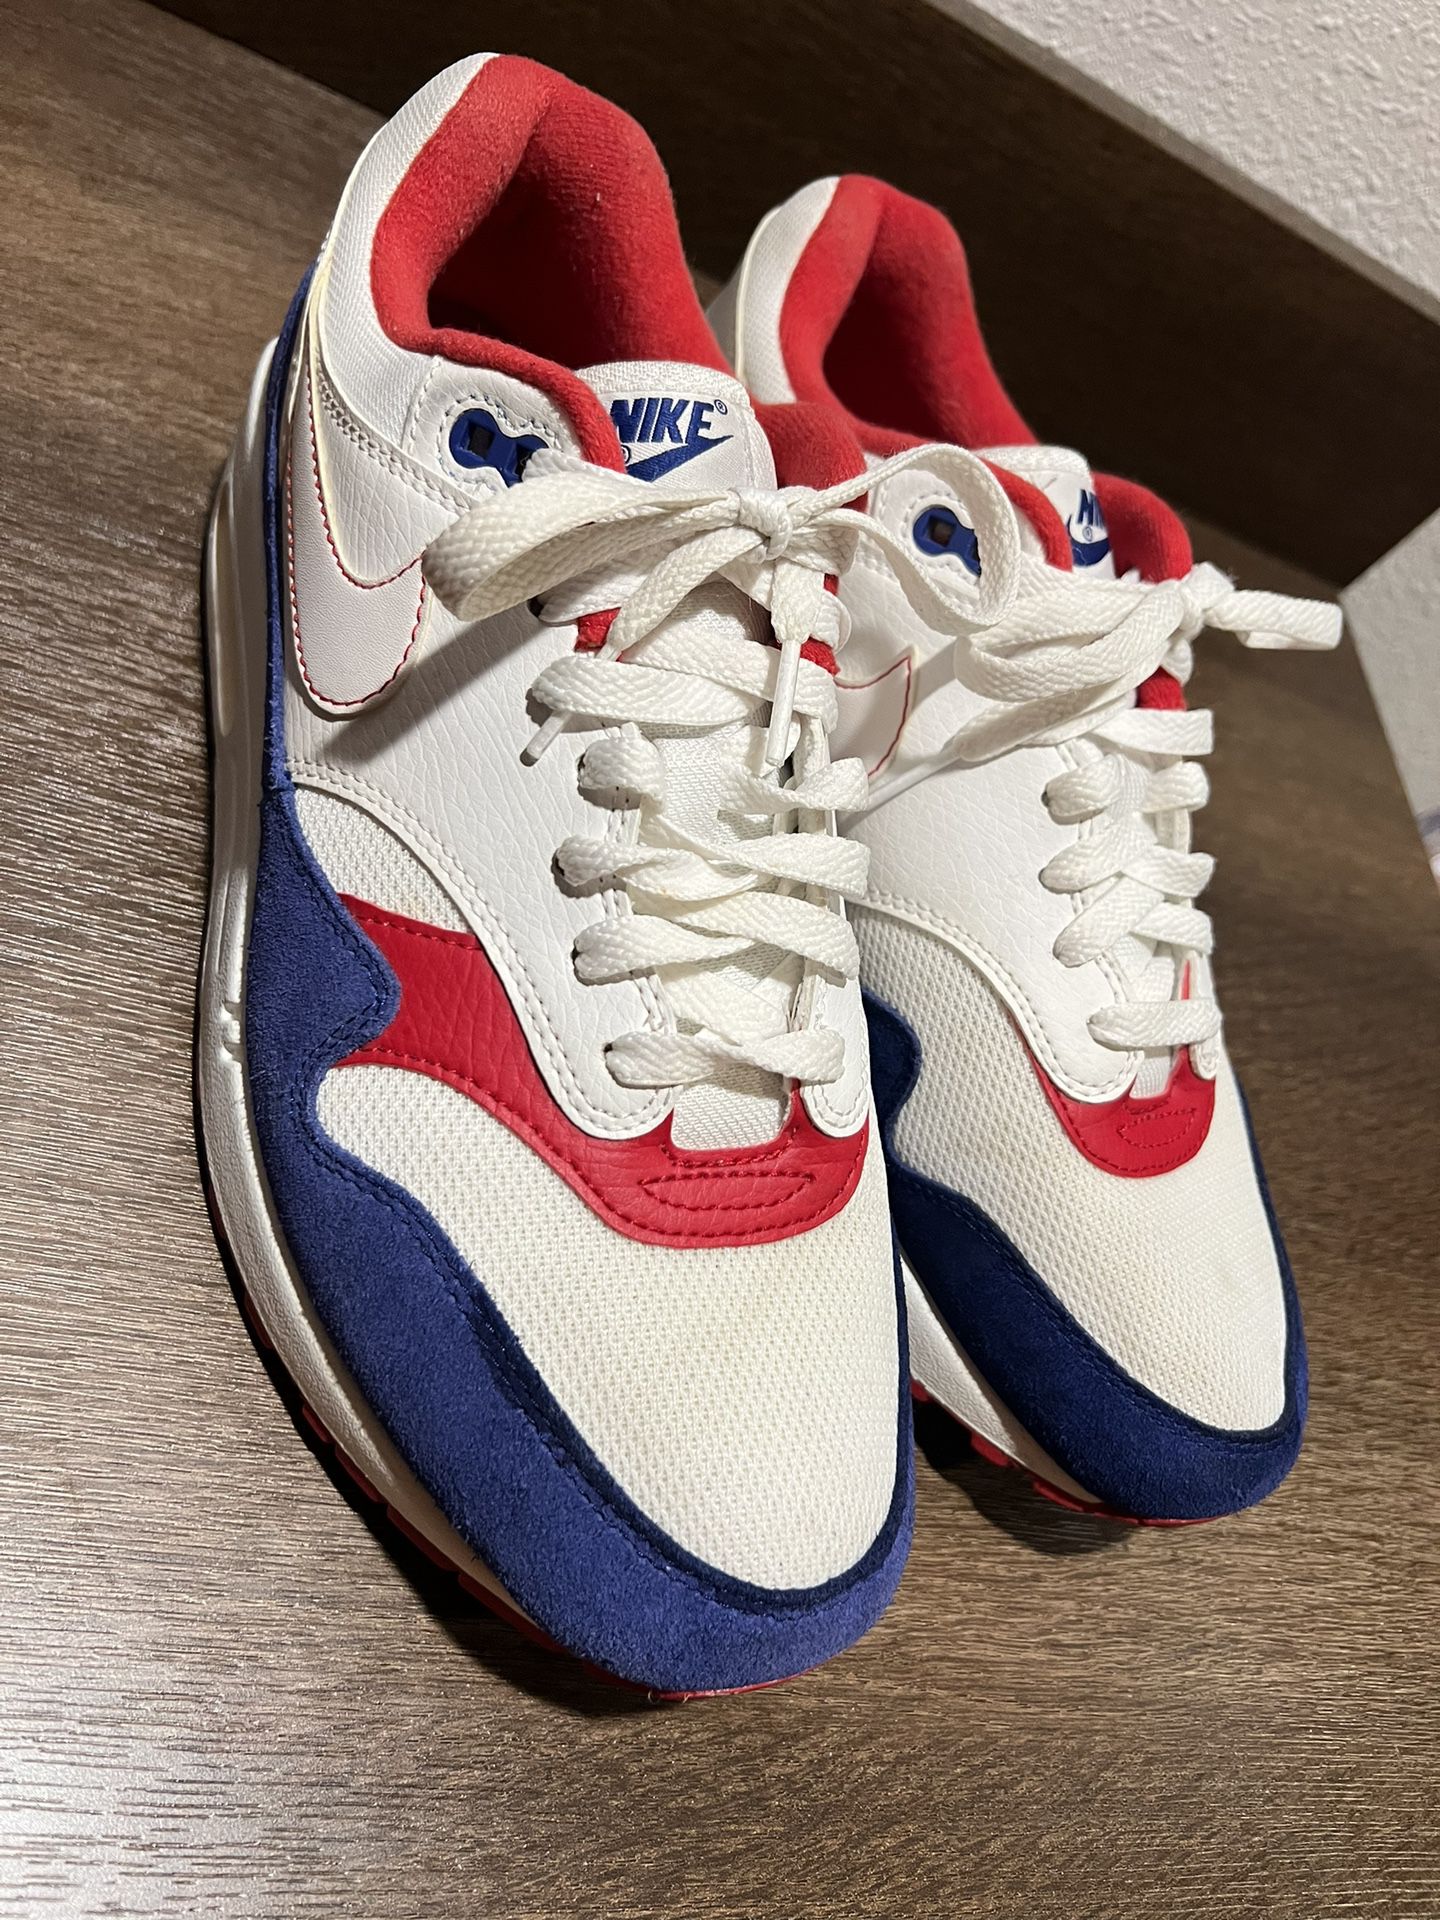 Nike Air Max 1 Sneakers Shoes Red White Blue Patriotic 